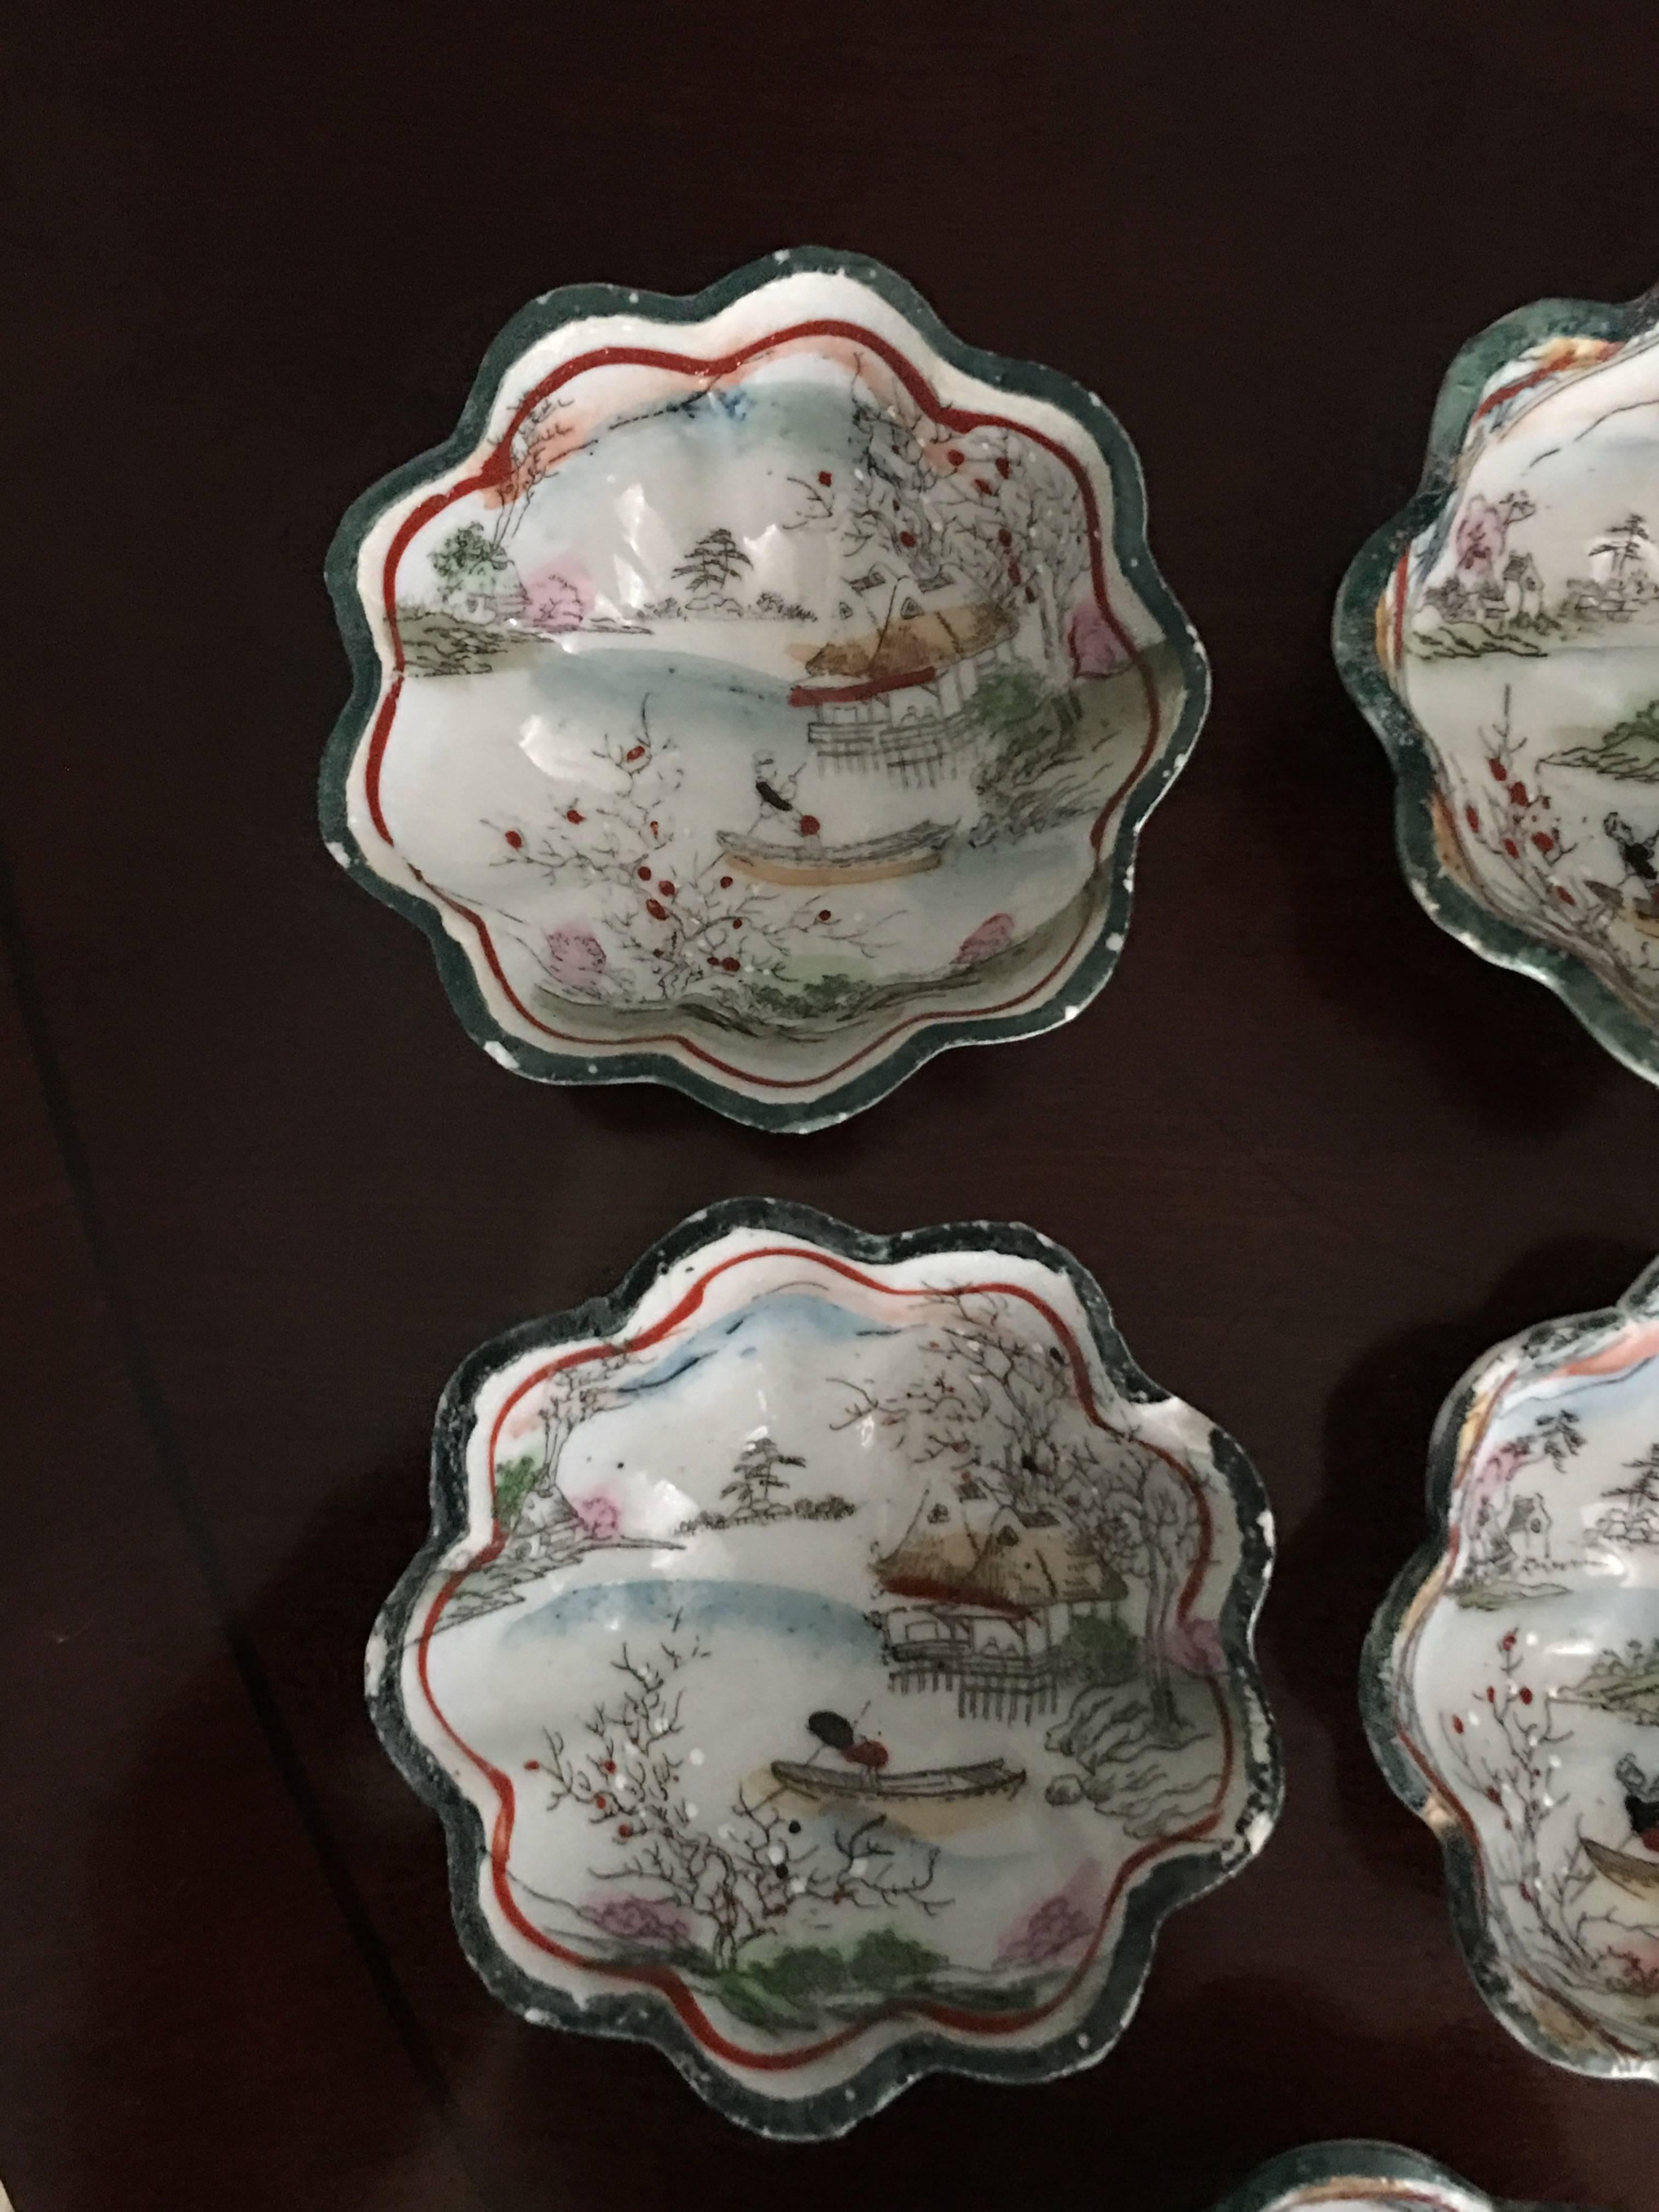 Offered is an immaculate set of five, 19th century Asian decorative bowls. Each feature a replicated image of ornate scenery.